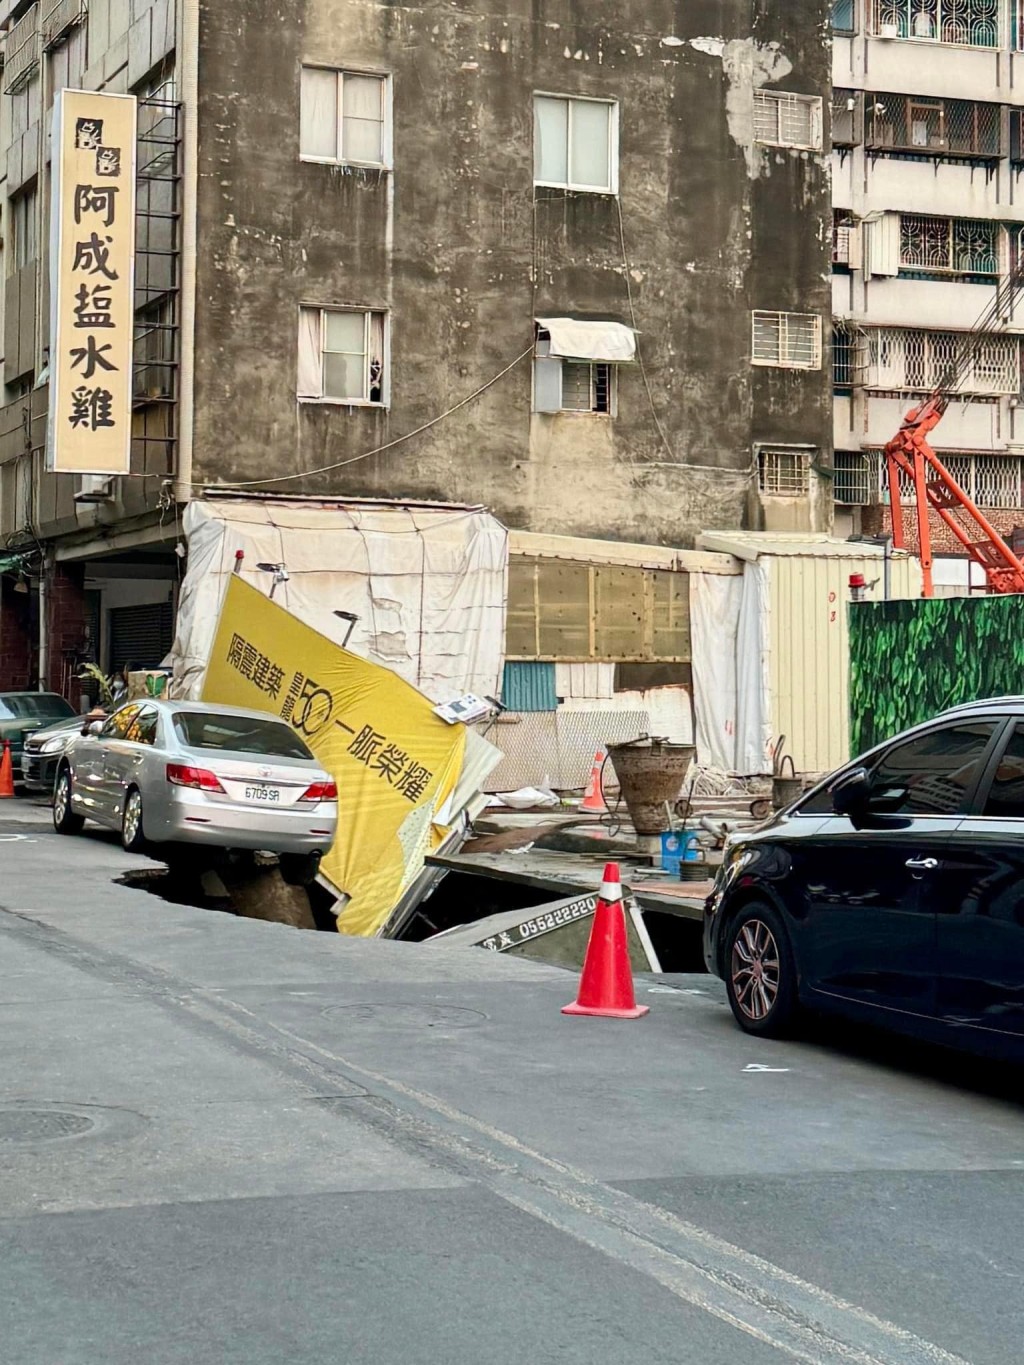 Tainan crane collapses while trying to remove truck from sinkhole